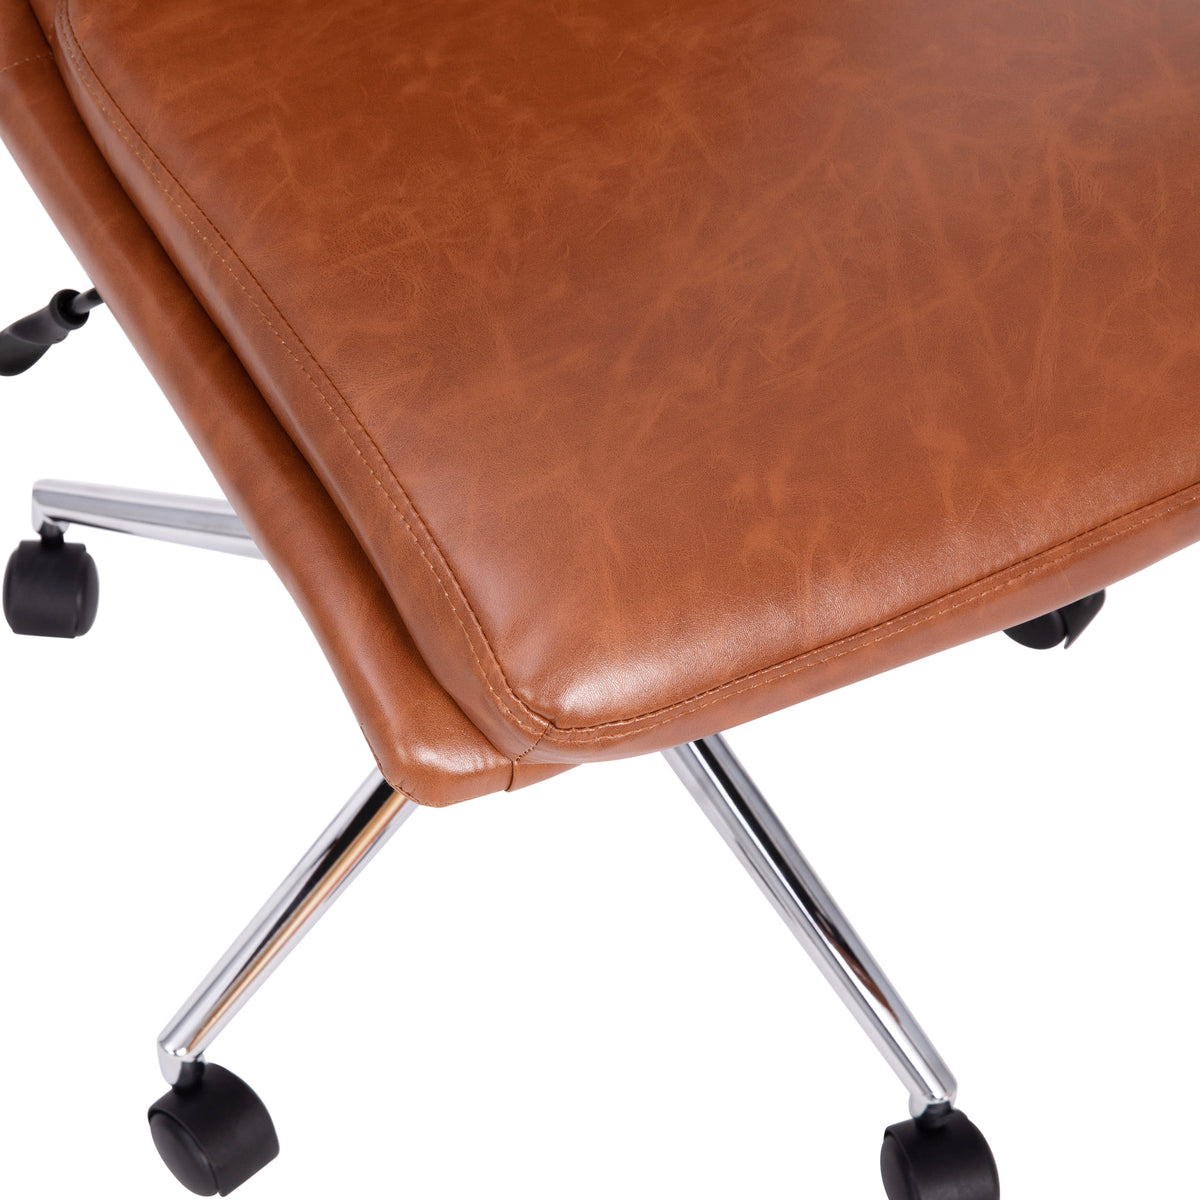 Brown |#| Mid-Back Armless Office Task Chair with Chrome 5-Star Base in Cognac LeatherSoft